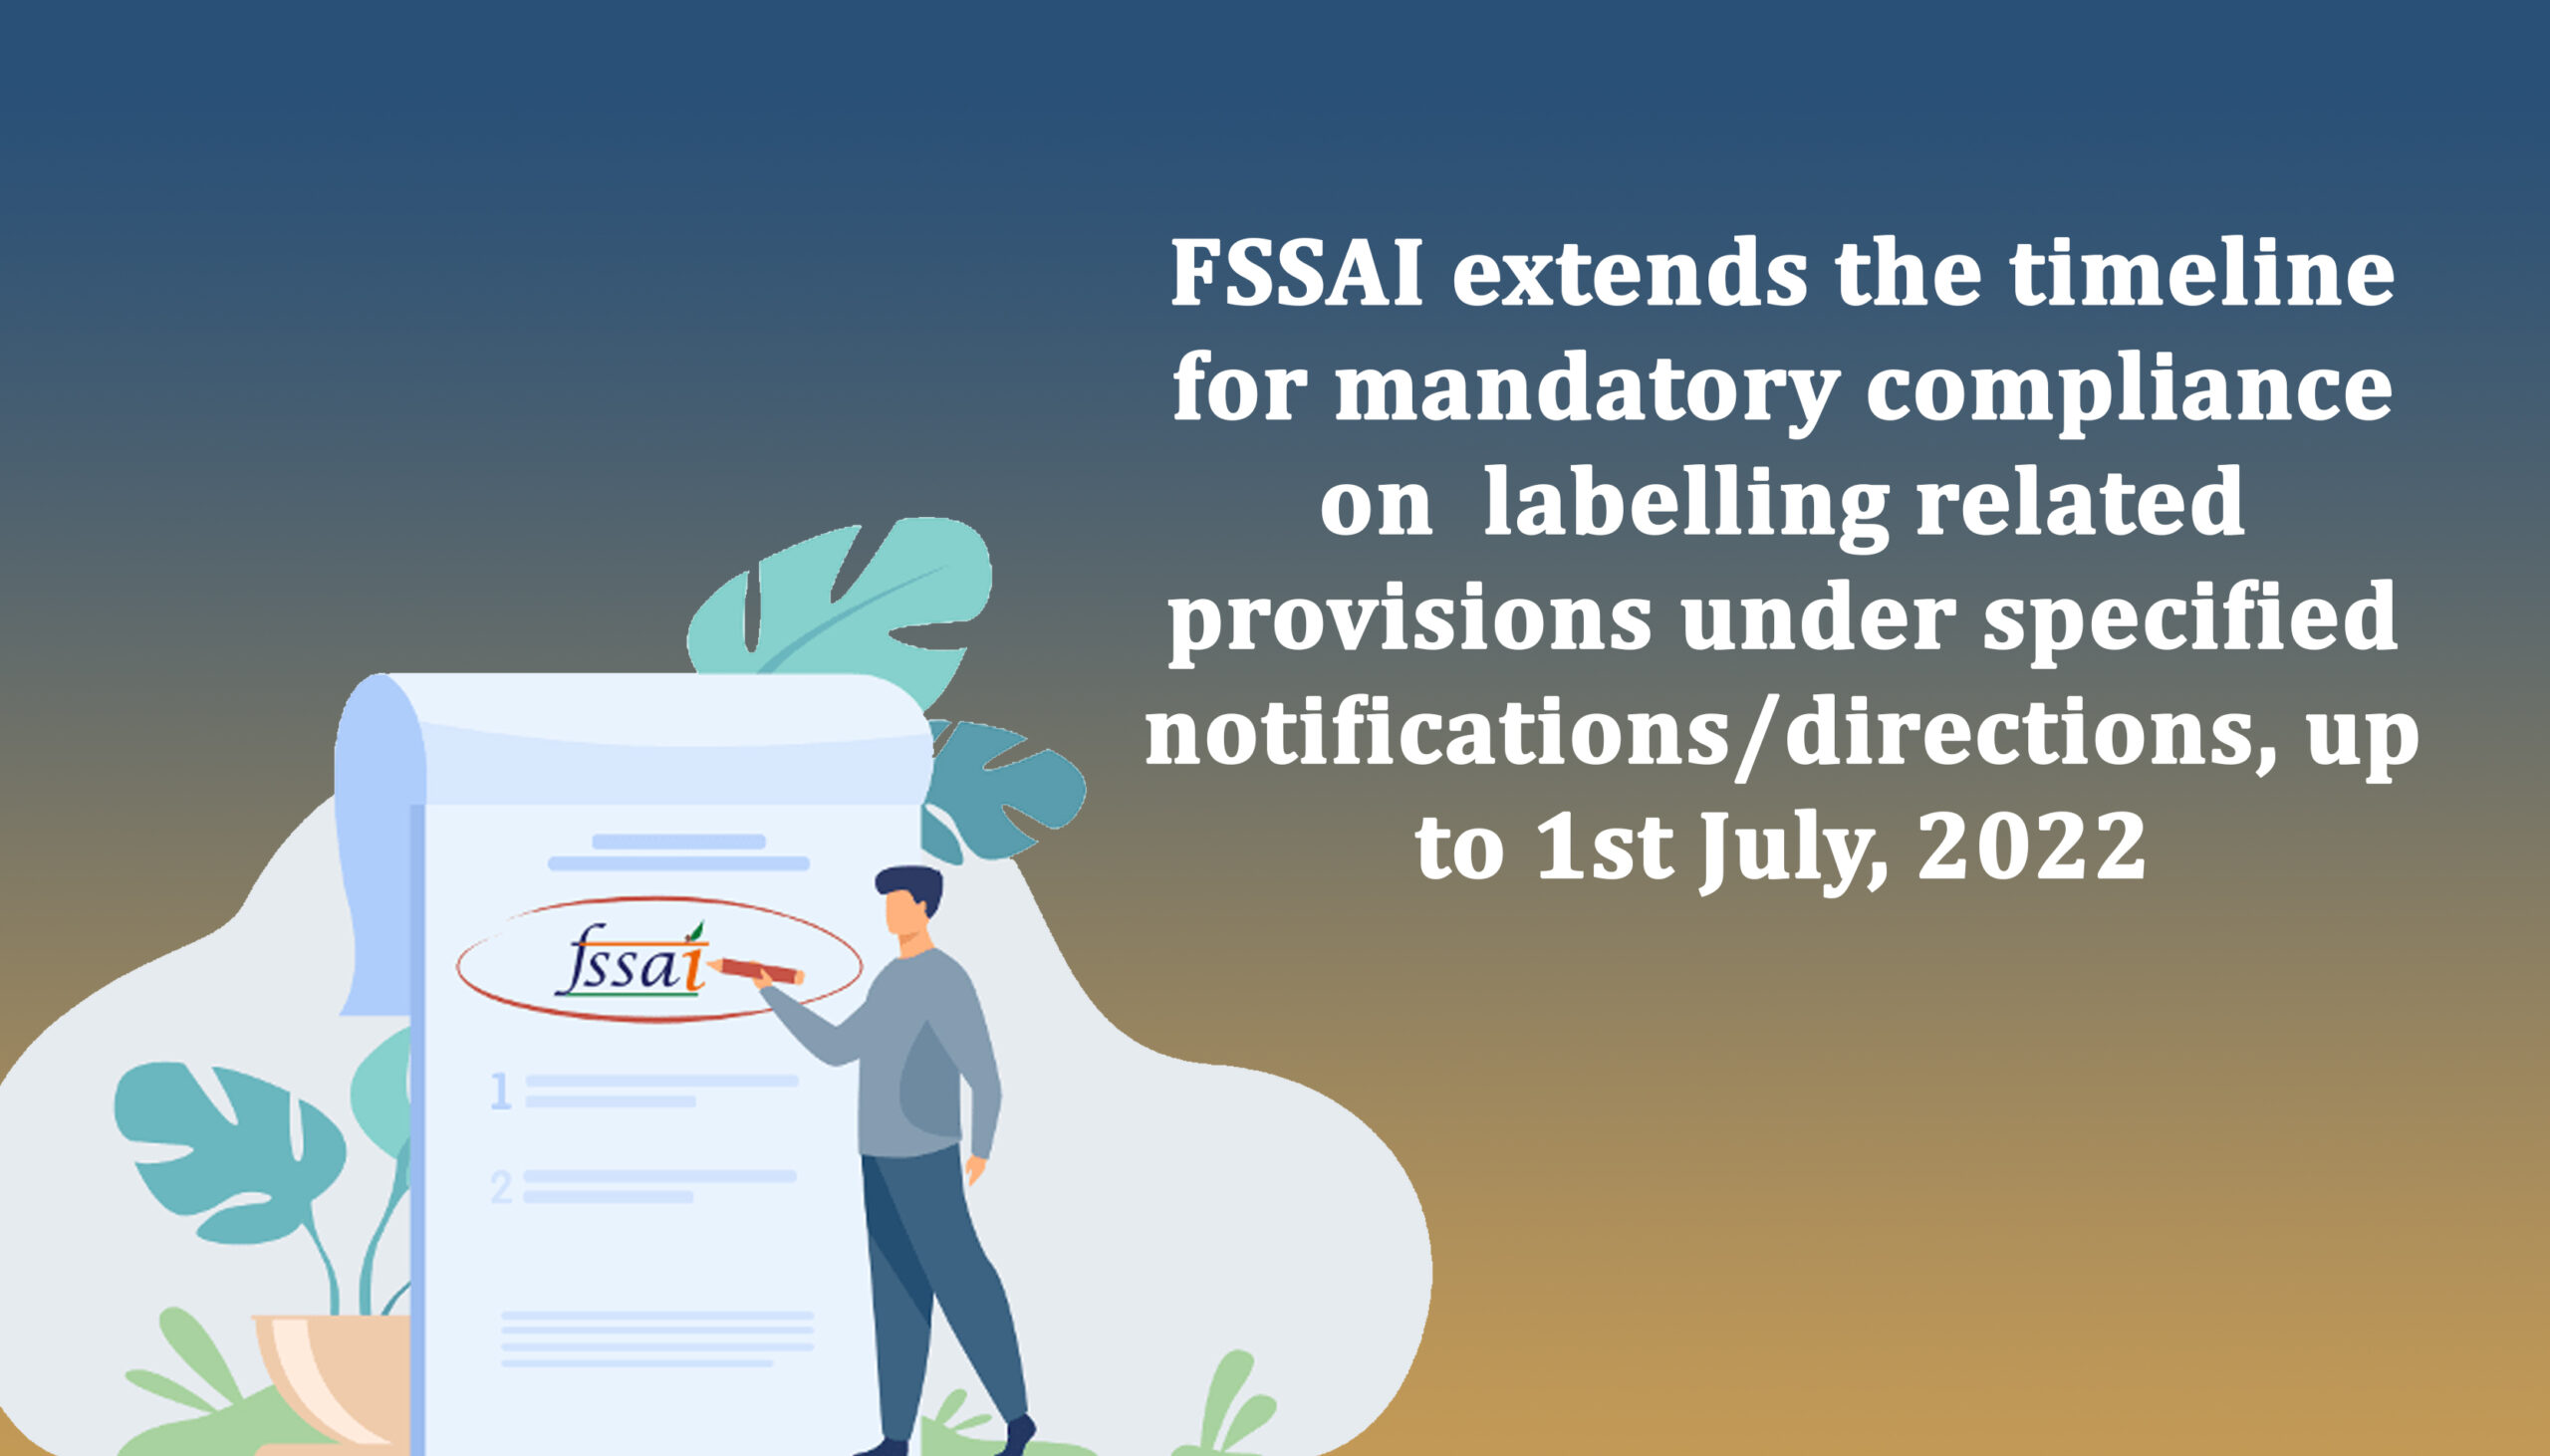 FSSAI extends the timeline for mandatory compliance on labelling related provisions under specified notificationsdirections, up to 1st July, 2022